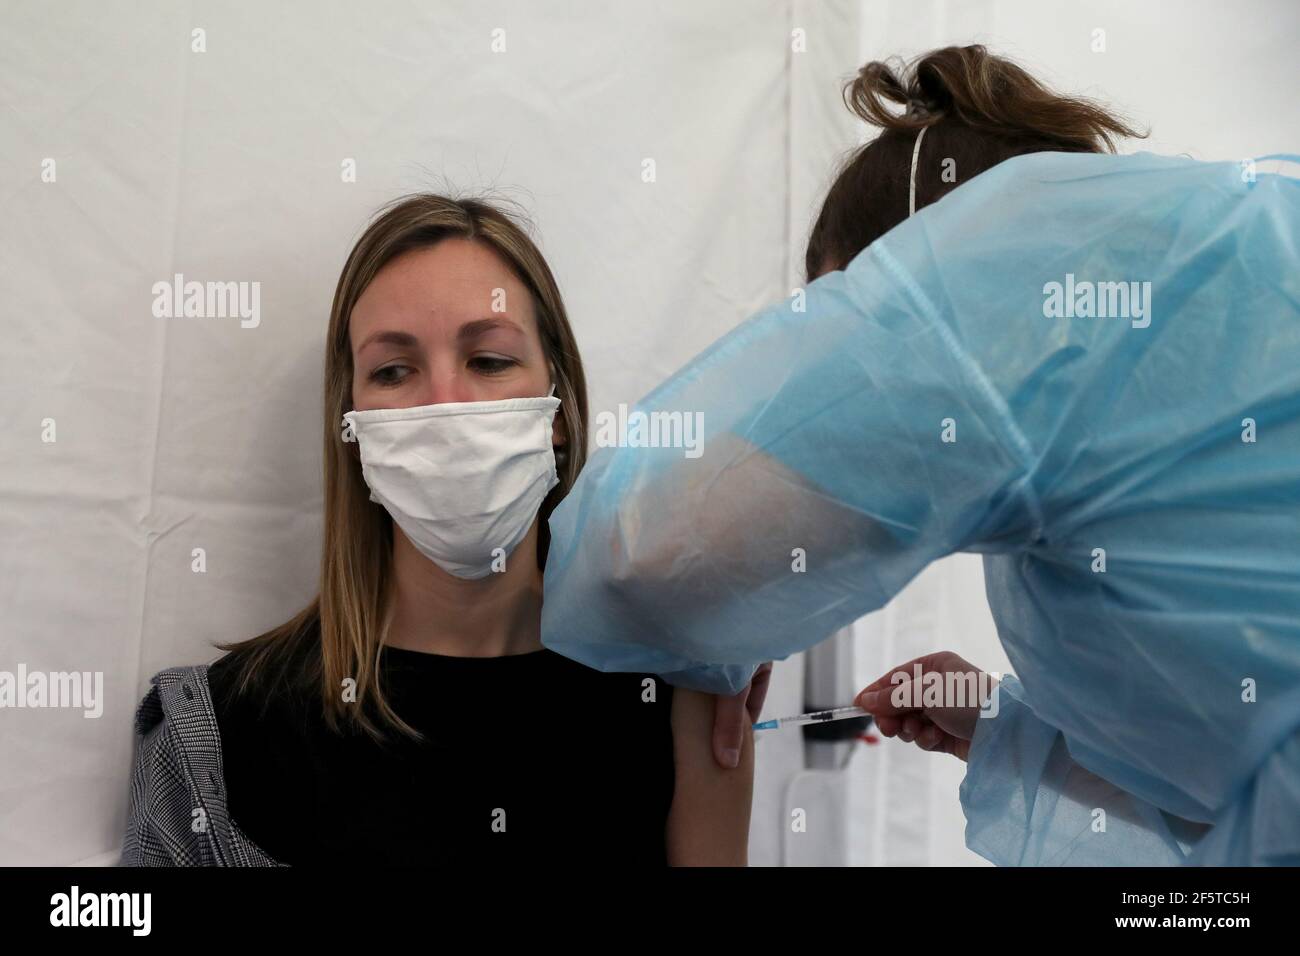 Lisbon, Portugal. 27th Mar, 2021. A teacher receives a dose of the AstraZeneca COVID-19 vaccine in Lisbon, Portugal, March 27, 2021. Portugal on Saturday started vaccinations of some 78,700 teachers and workers from pre-schools and schools of the first four years of the nine-year basic education. They are listed as one of the priority groups for the resumption of classes. Credit: Pedro Fiuza/Xinhua/Alamy Live News Stock Photo